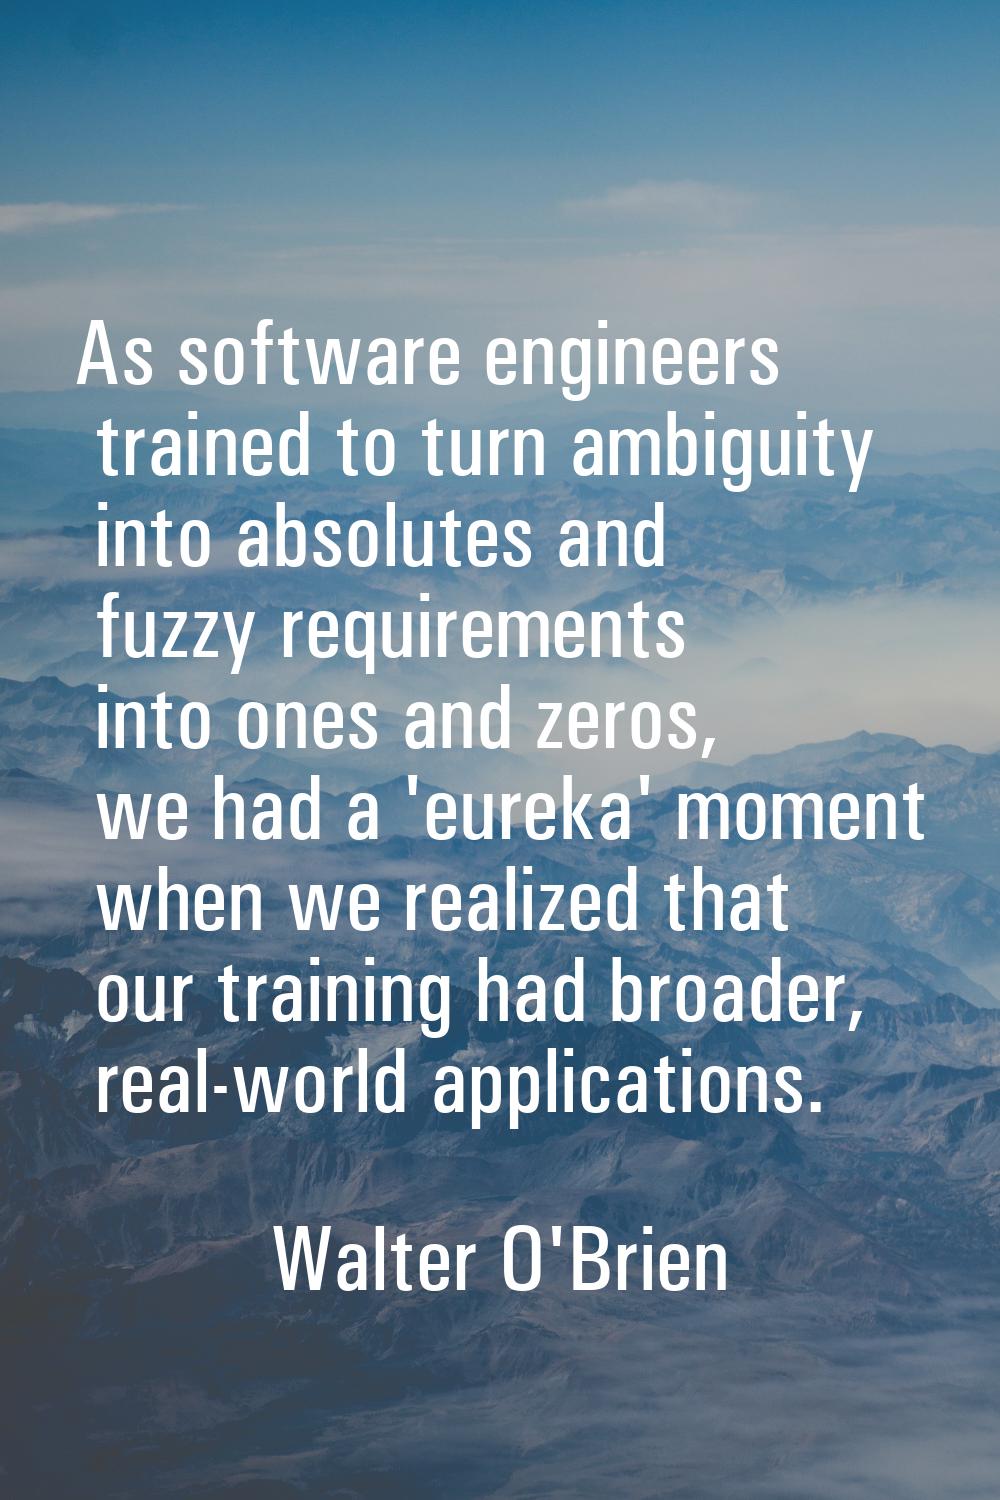 As software engineers trained to turn ambiguity into absolutes and fuzzy requirements into ones and